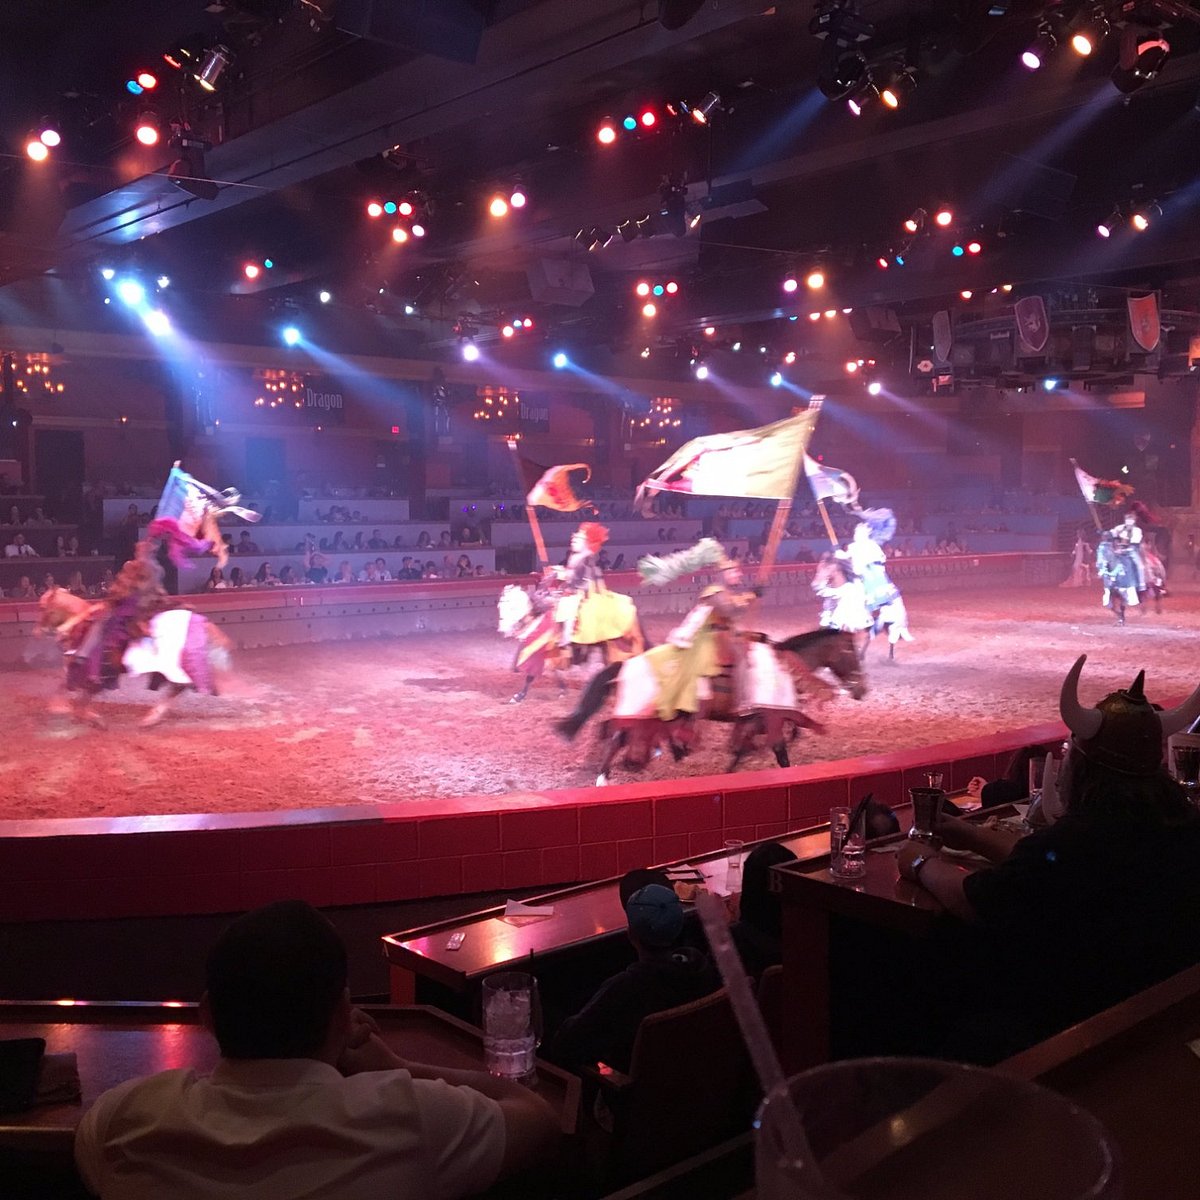 Tournament of Kings dinner and show in Las Vegas